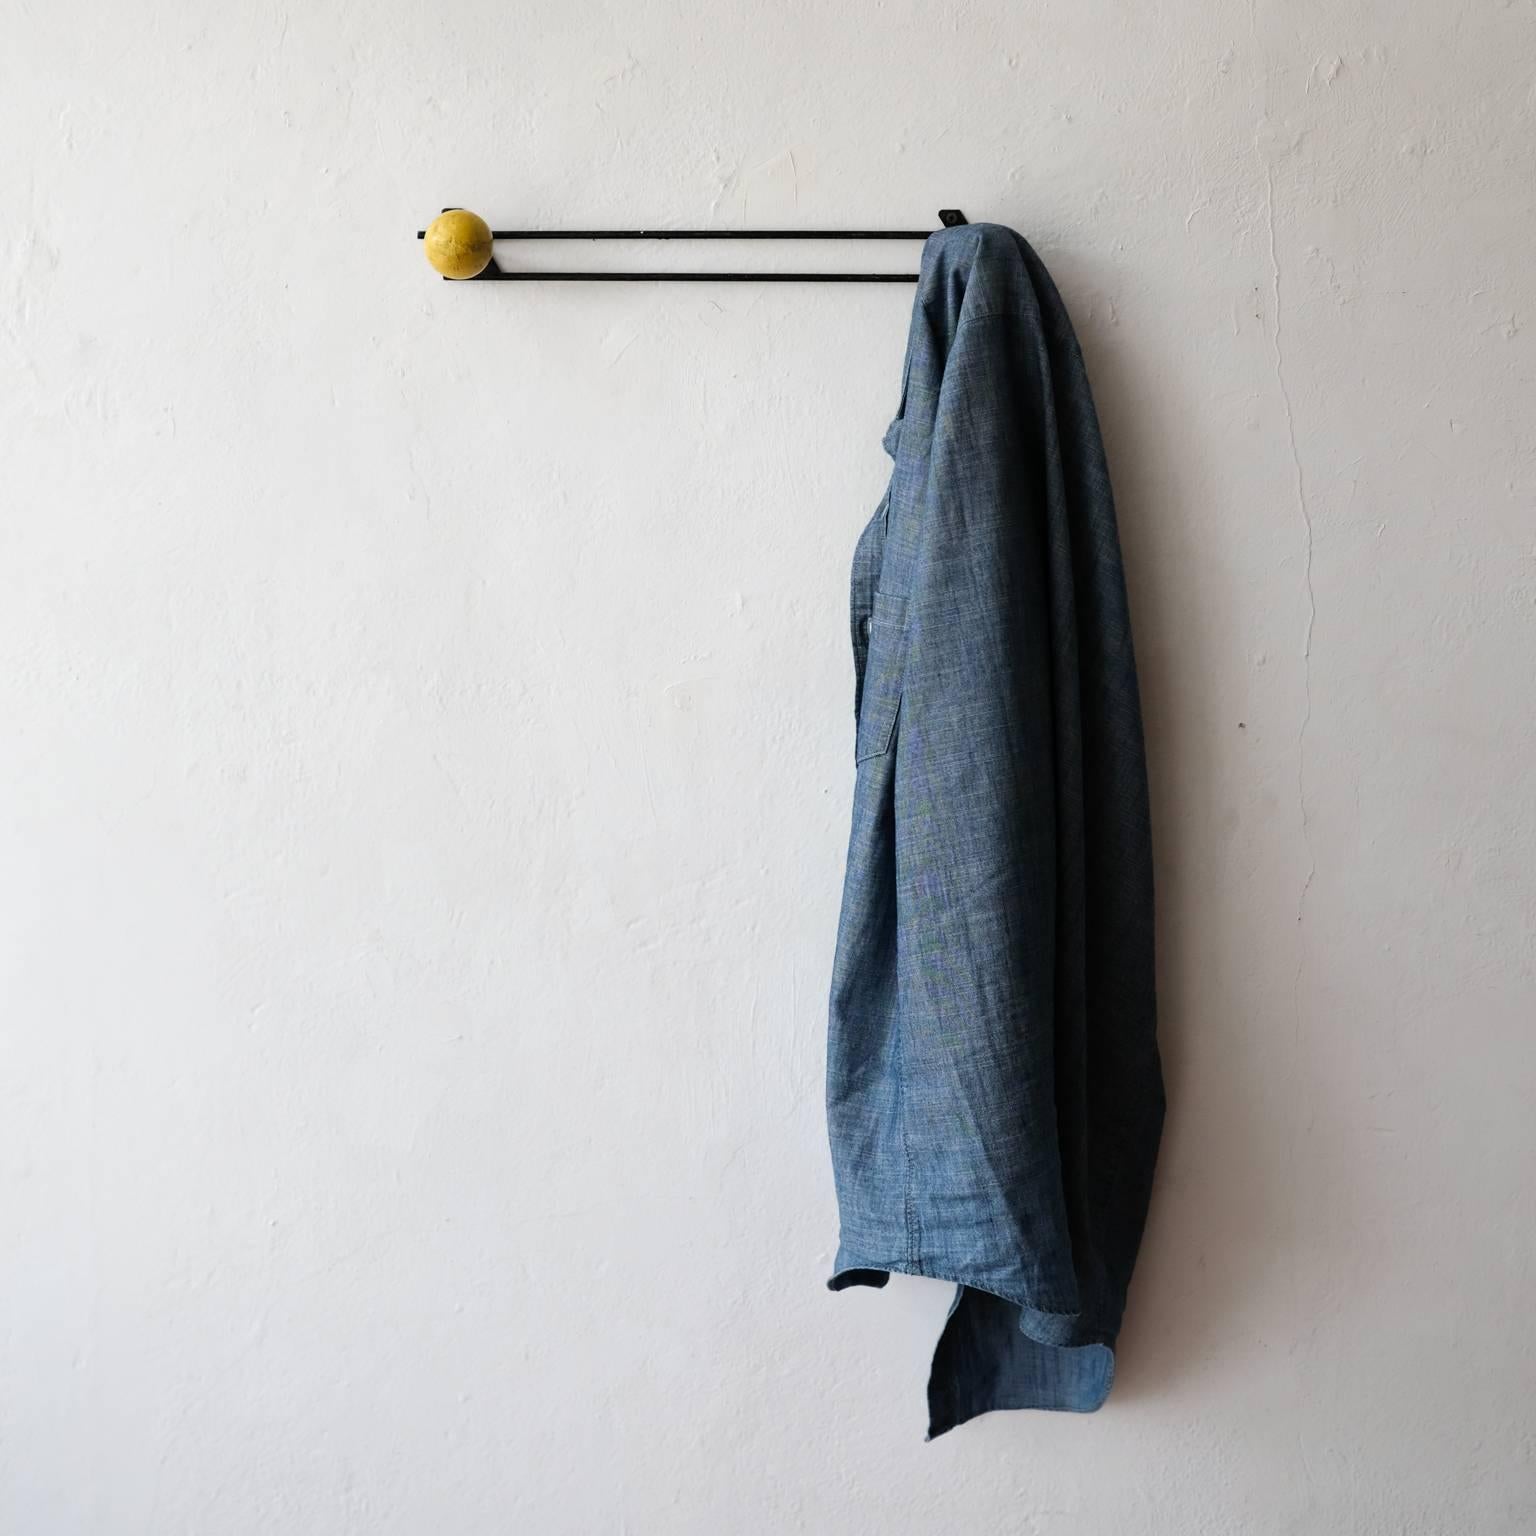 Wall-mounted coat rack. Iron and wood. Made in France, 1950s.